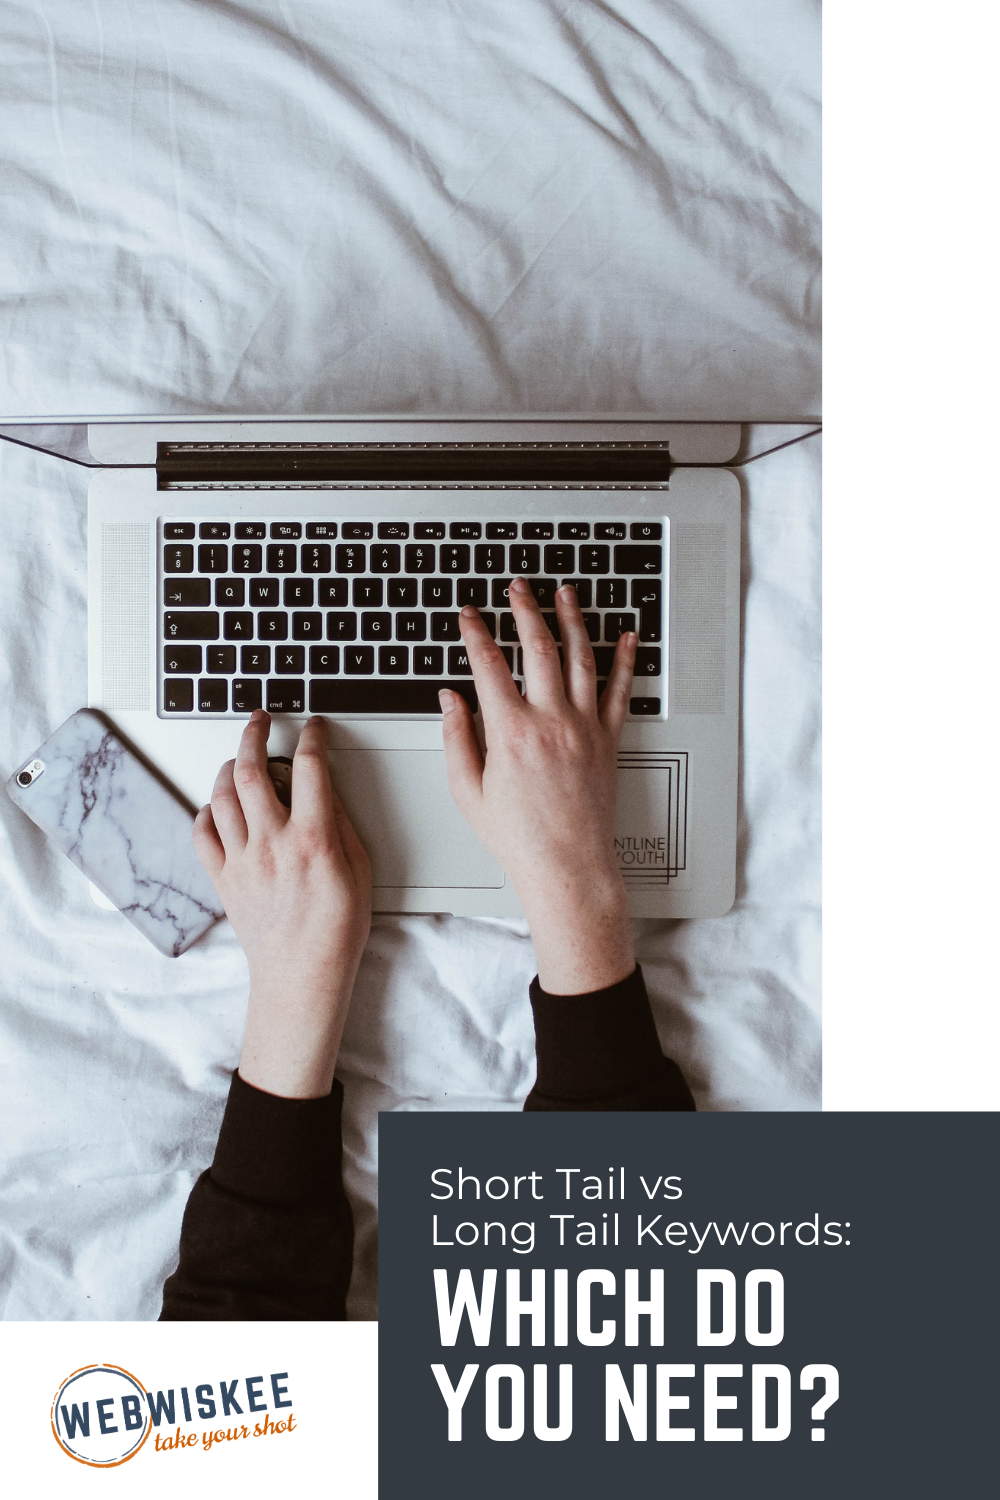 Short Tail vs Long Tail Keywords: Which Do You Need? by WebWiskee